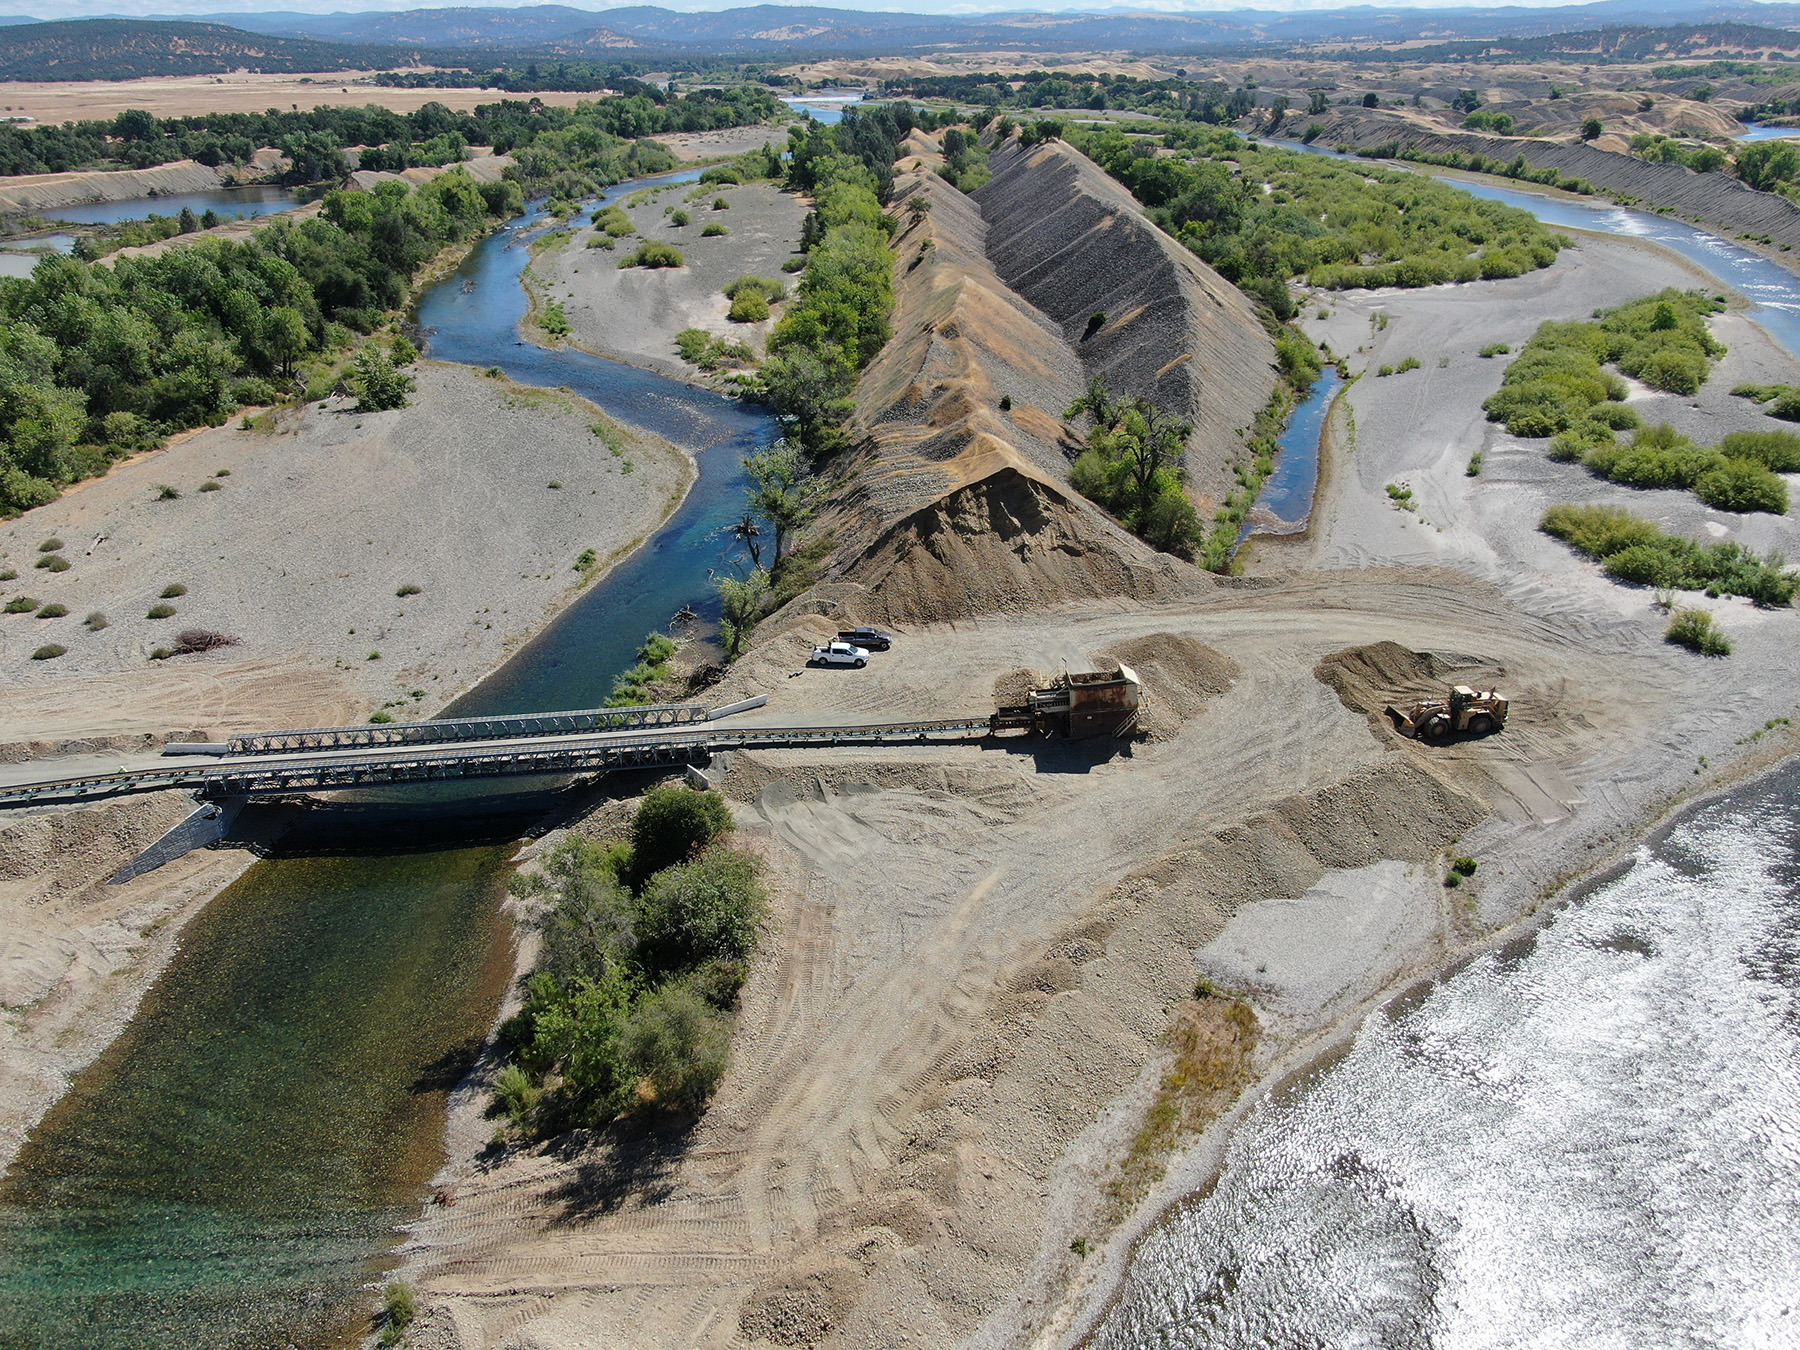 photograph showing land punctuated by meandering waterways, a bridge, construction equipment, earthen embankments, and trees